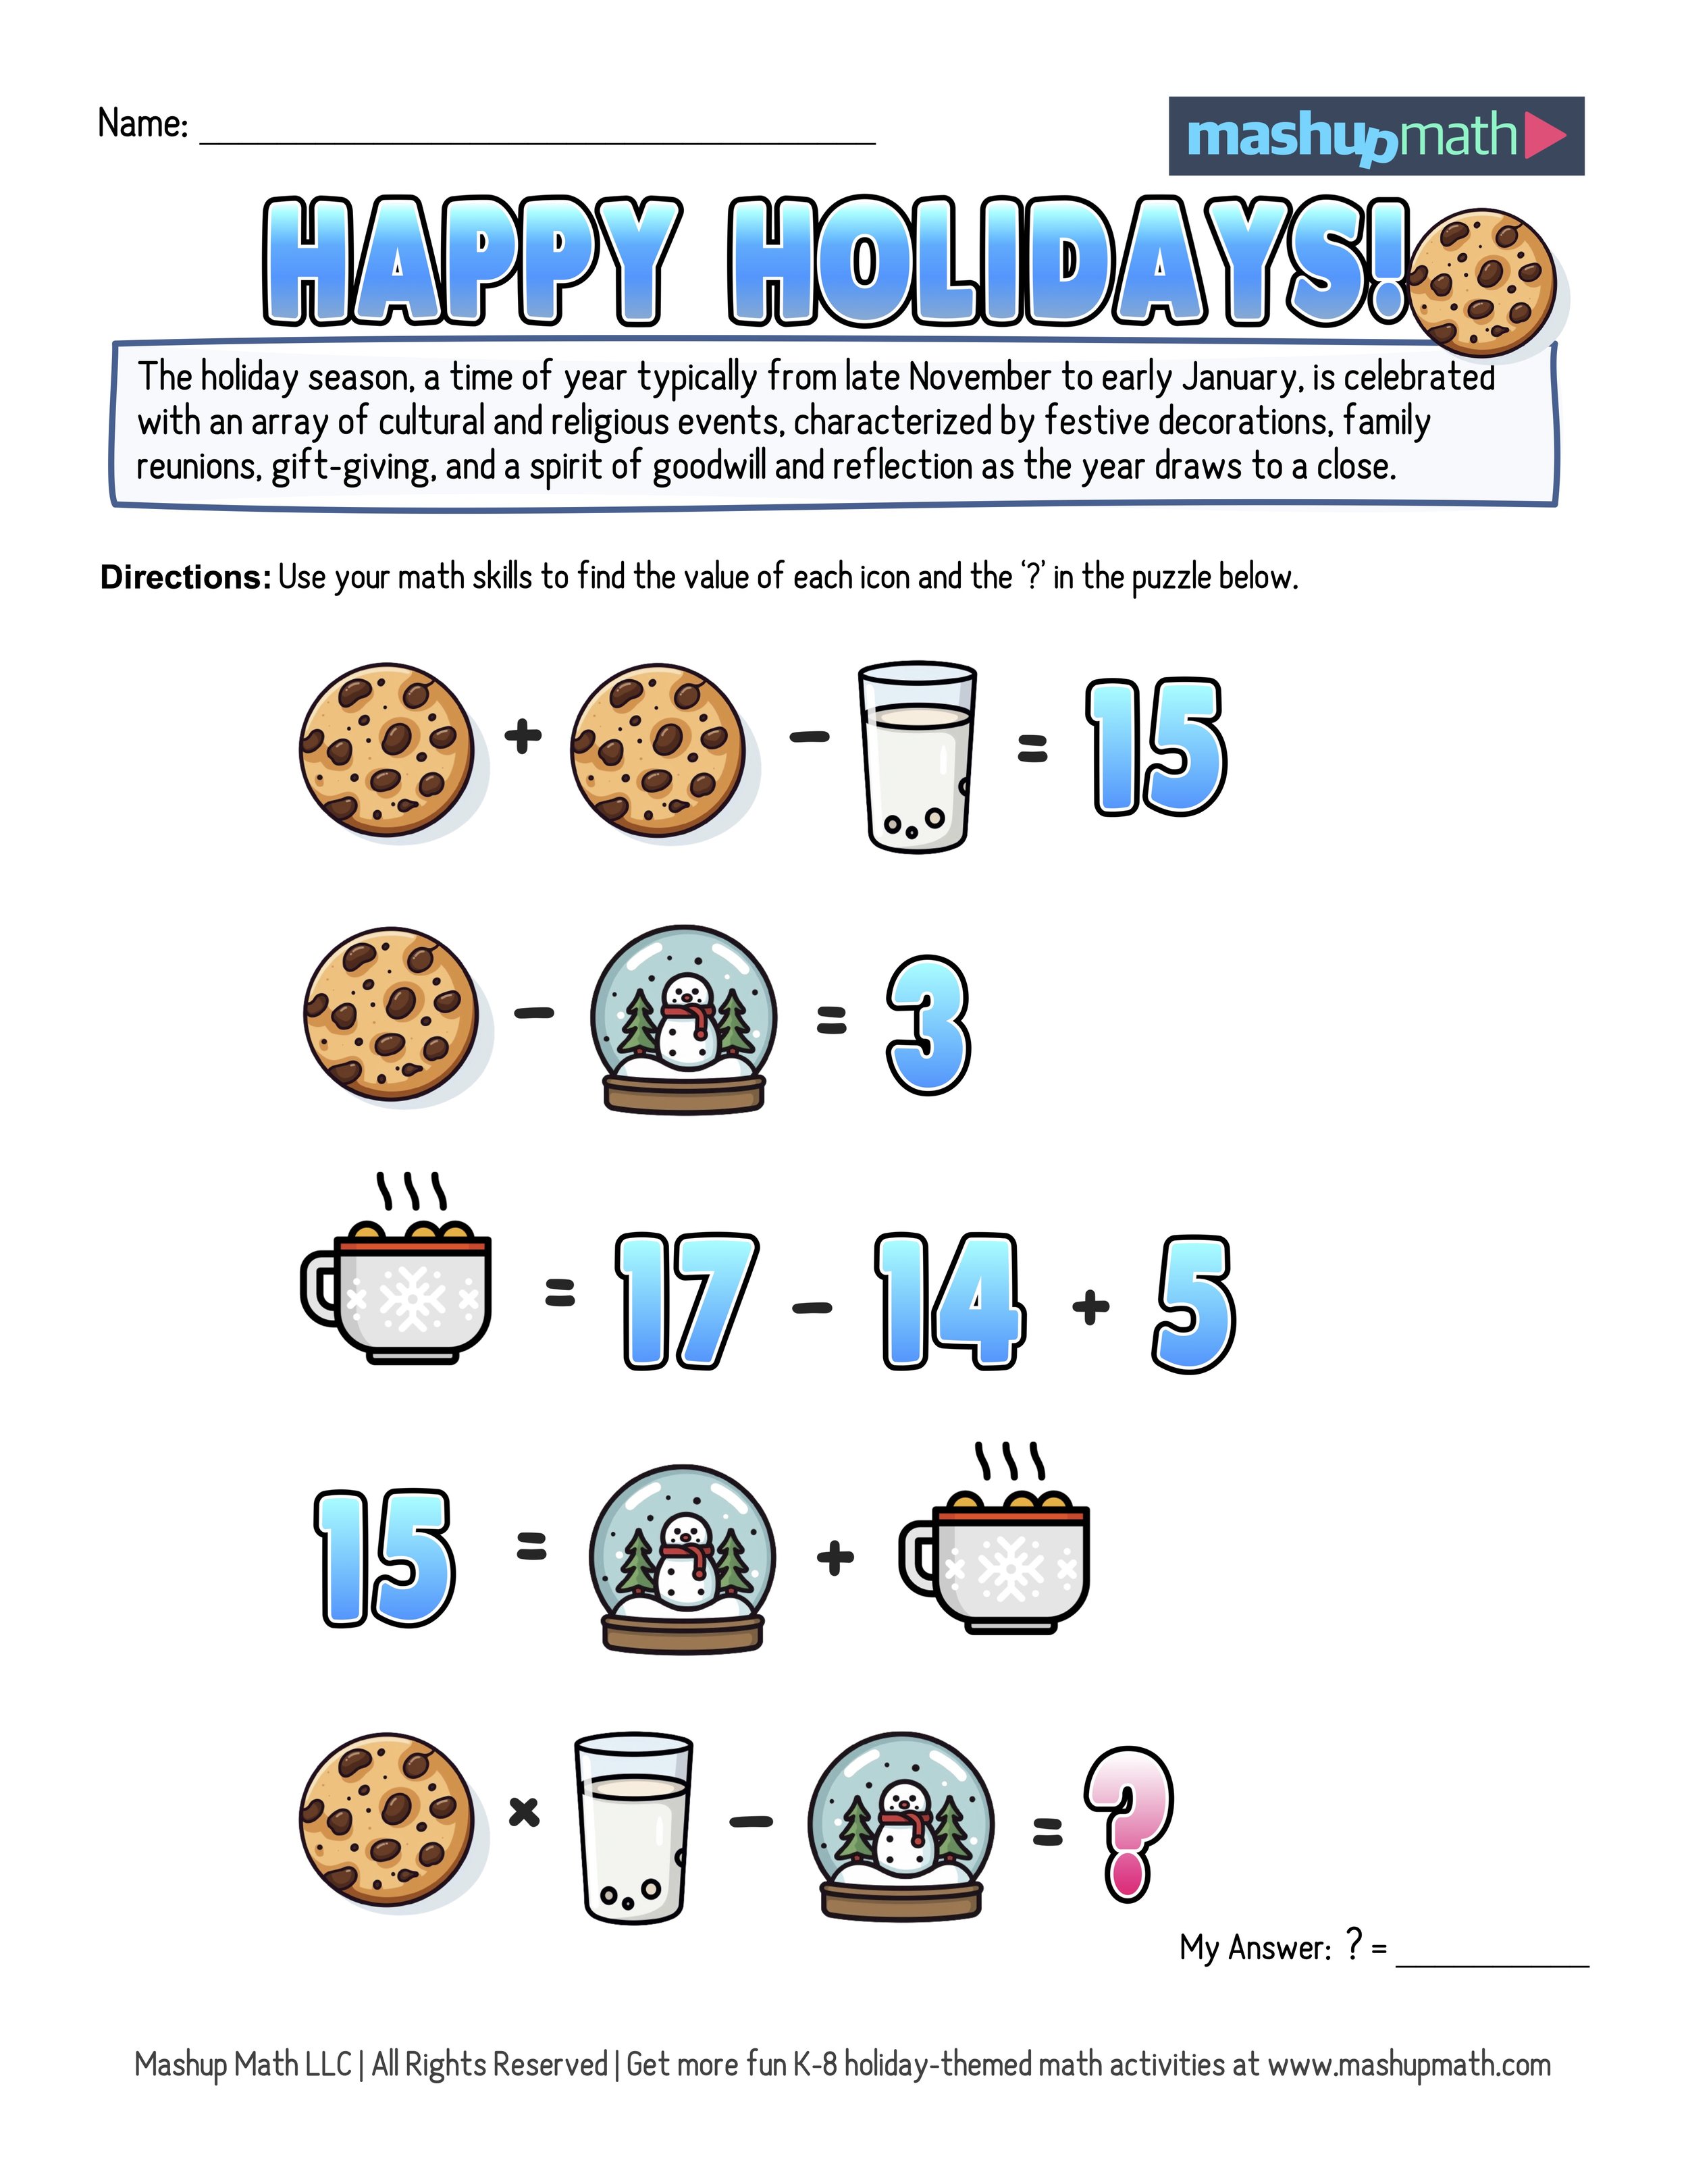 12 days of christmas problem solving